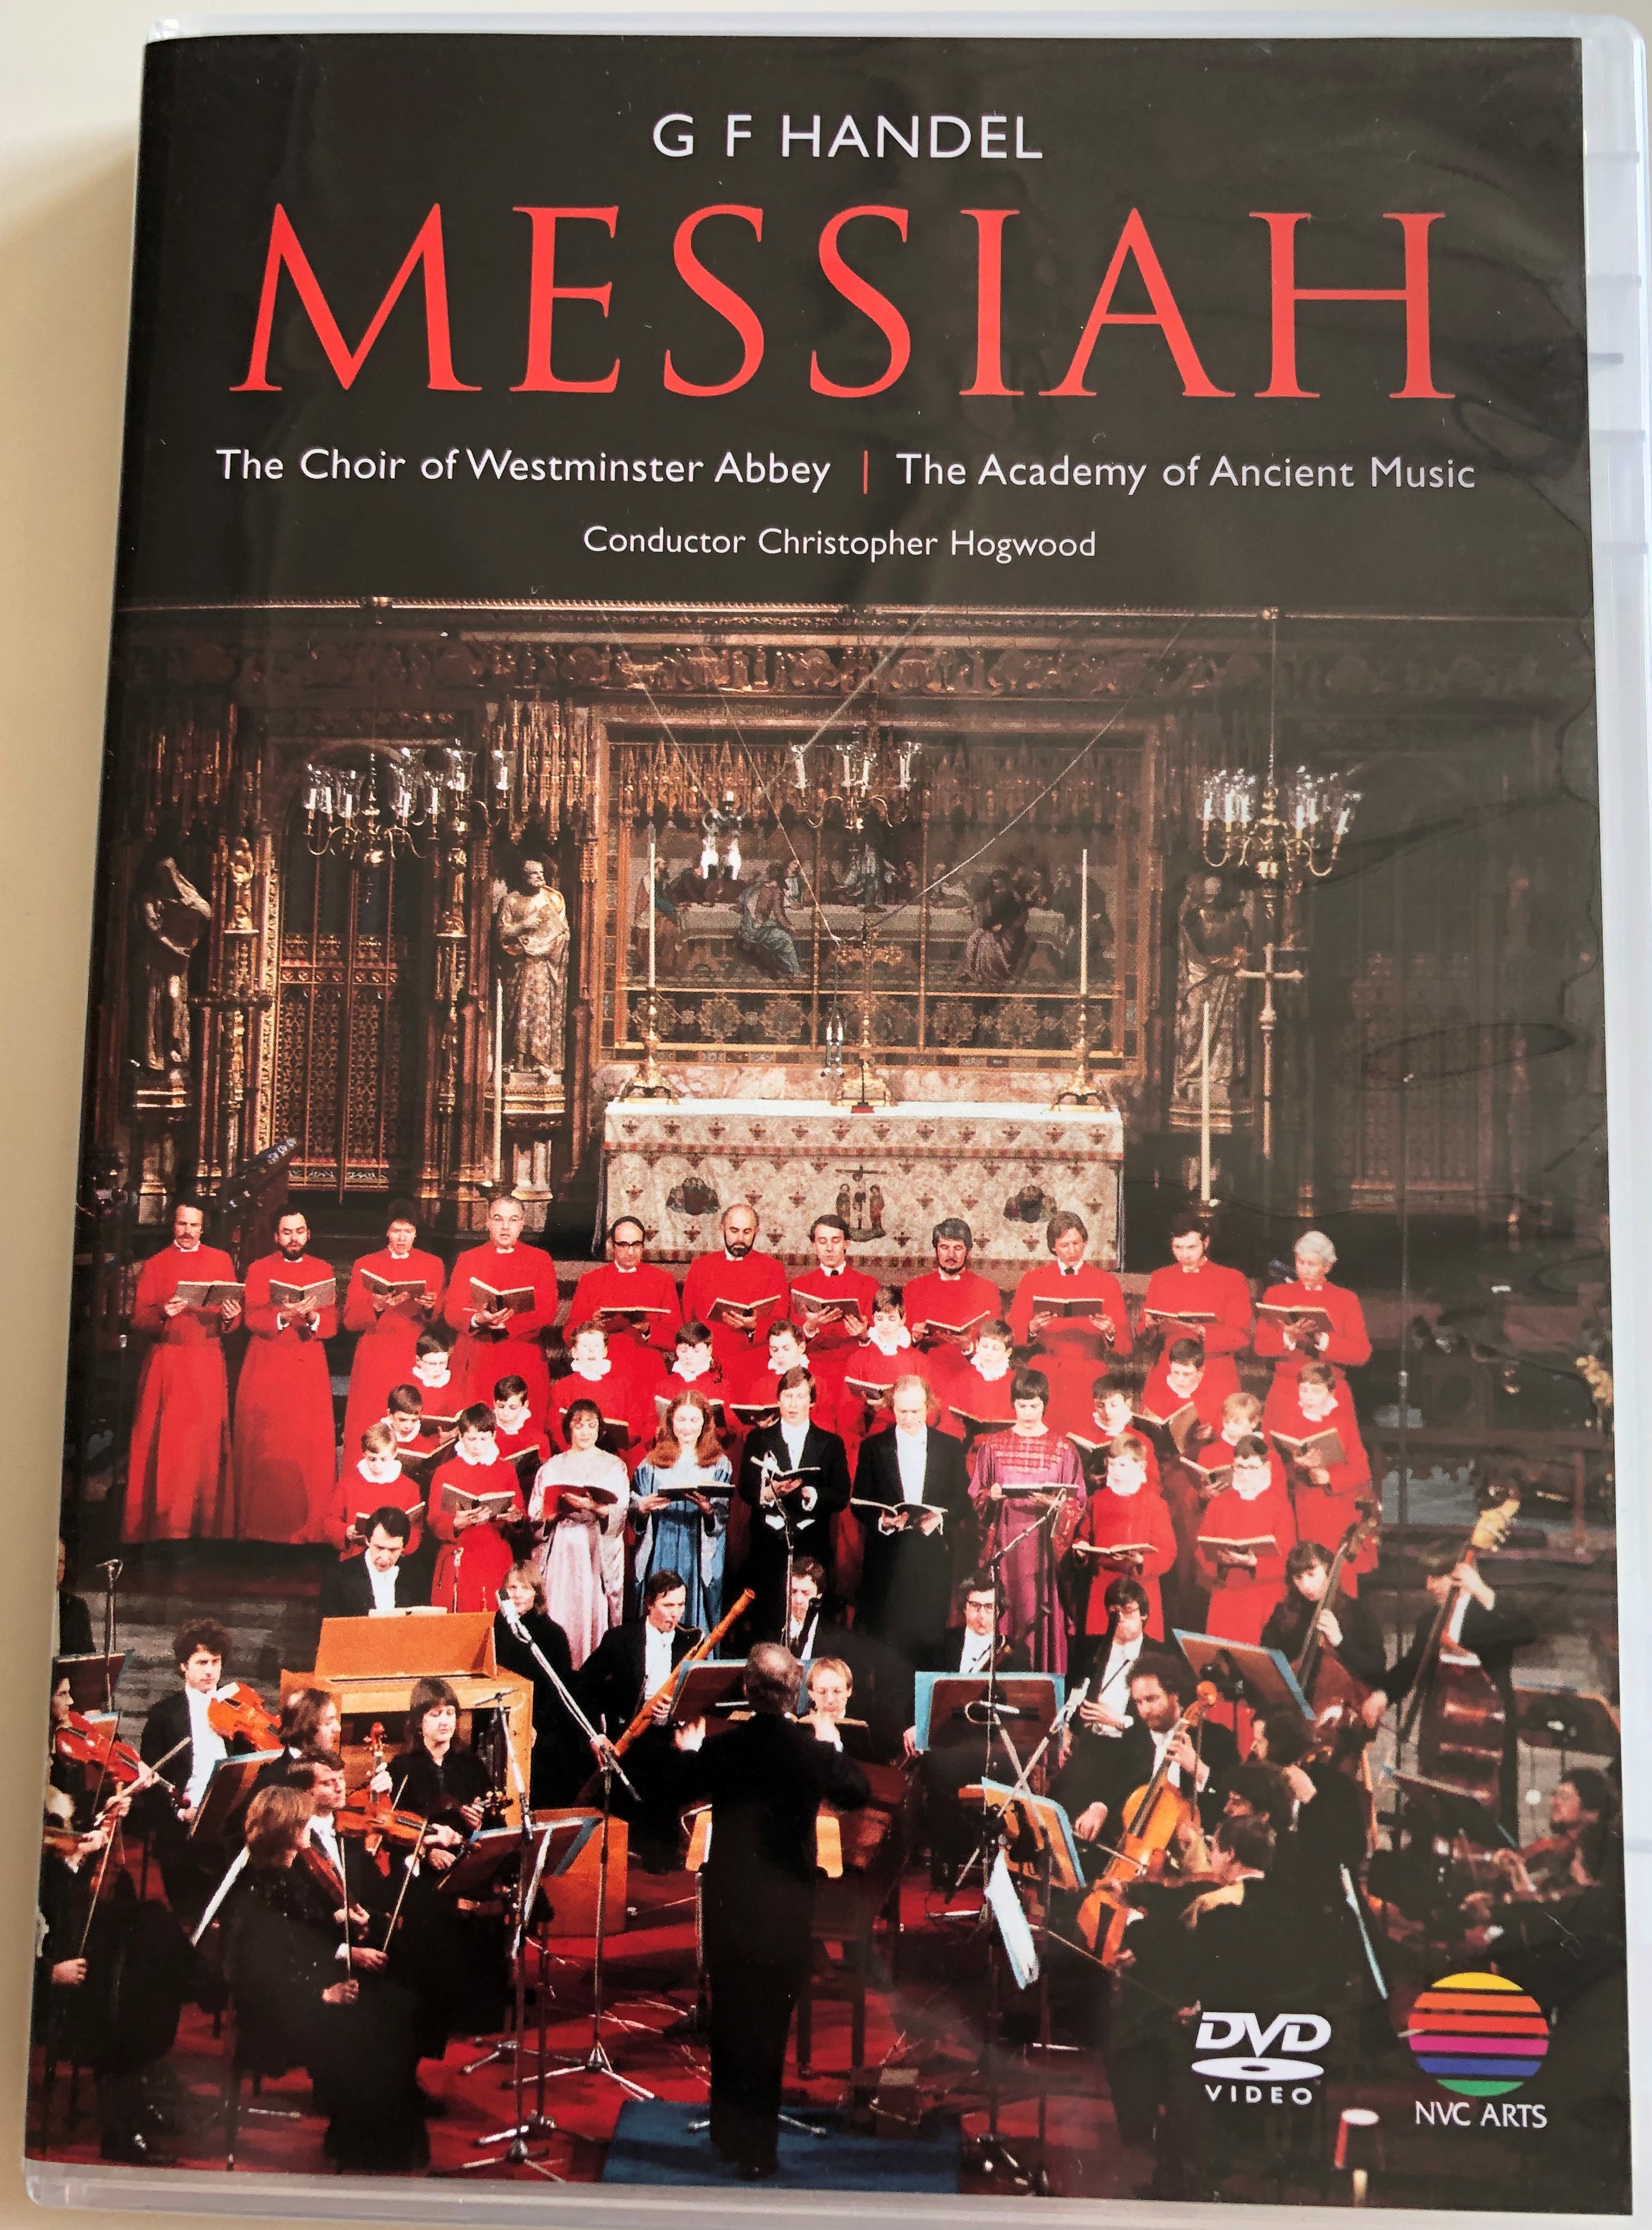 G. F. Handel - Messiah DVD - The Coir of Westminster Abbey 1